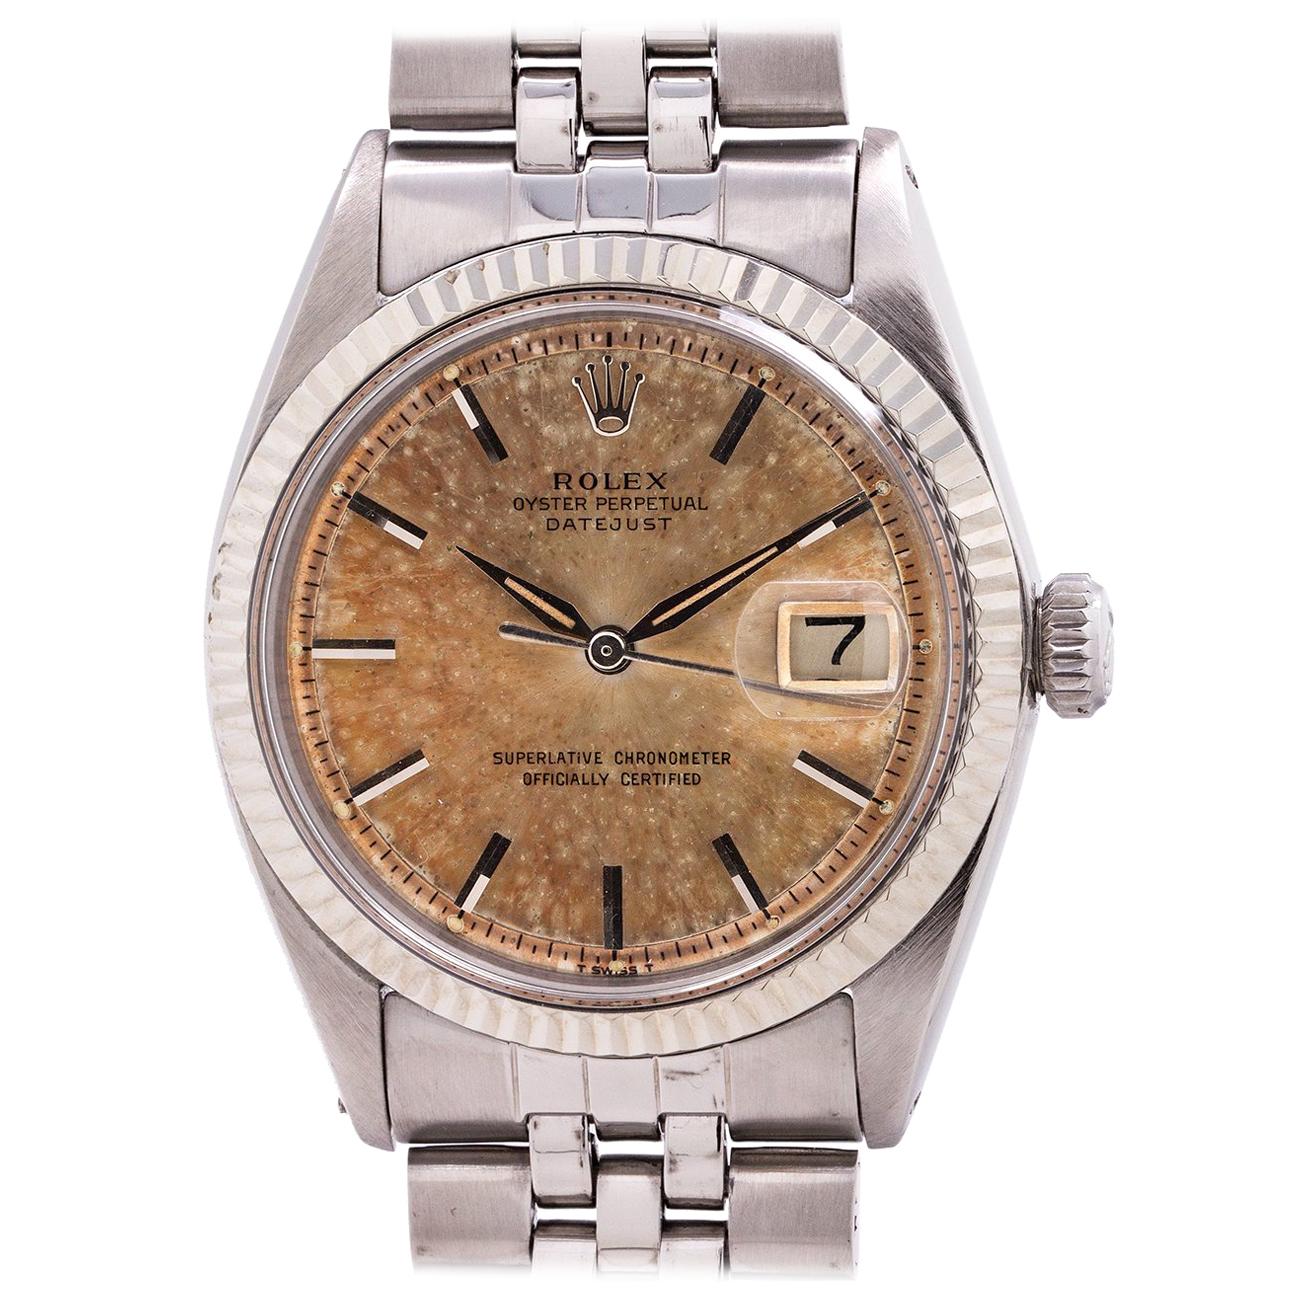 Rolex Stainless Steel Tropical Peach Dial Self-Winding Wristwatch 1601, c1962 For Sale